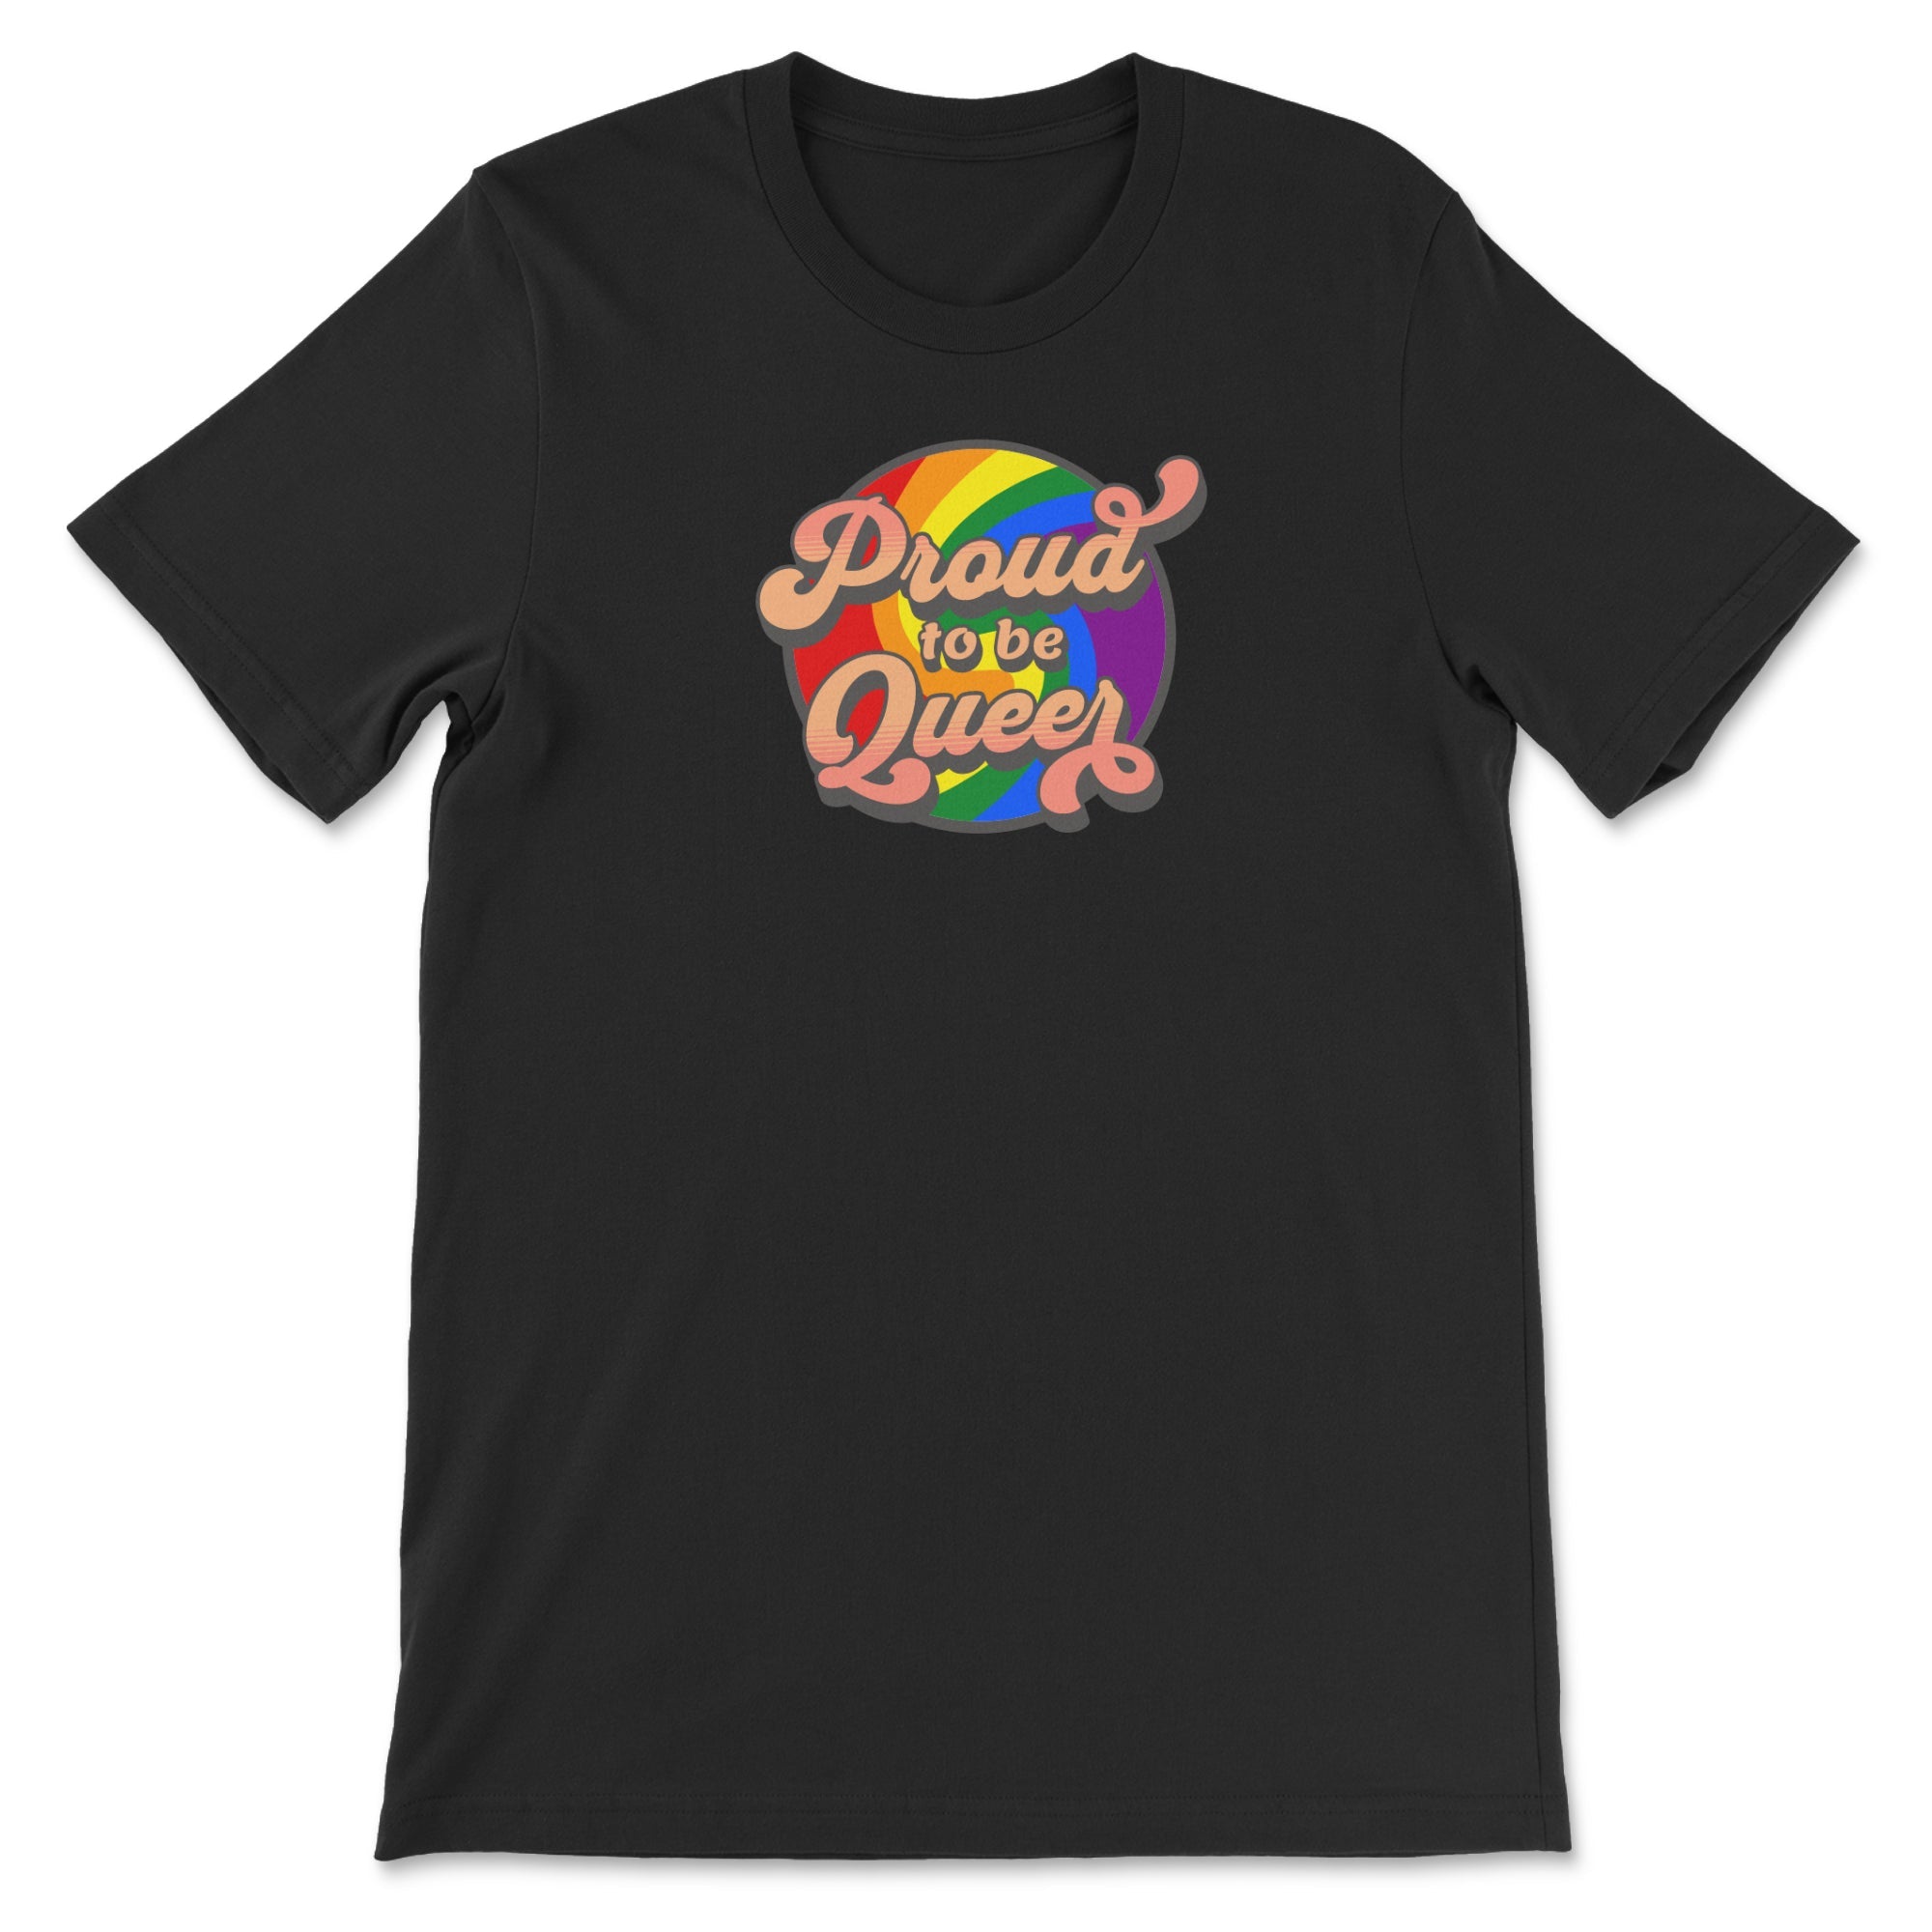 Retro "Proud to be Queer" T-Shirt - Vintage Pride Statement - Hunky Tops#color_black